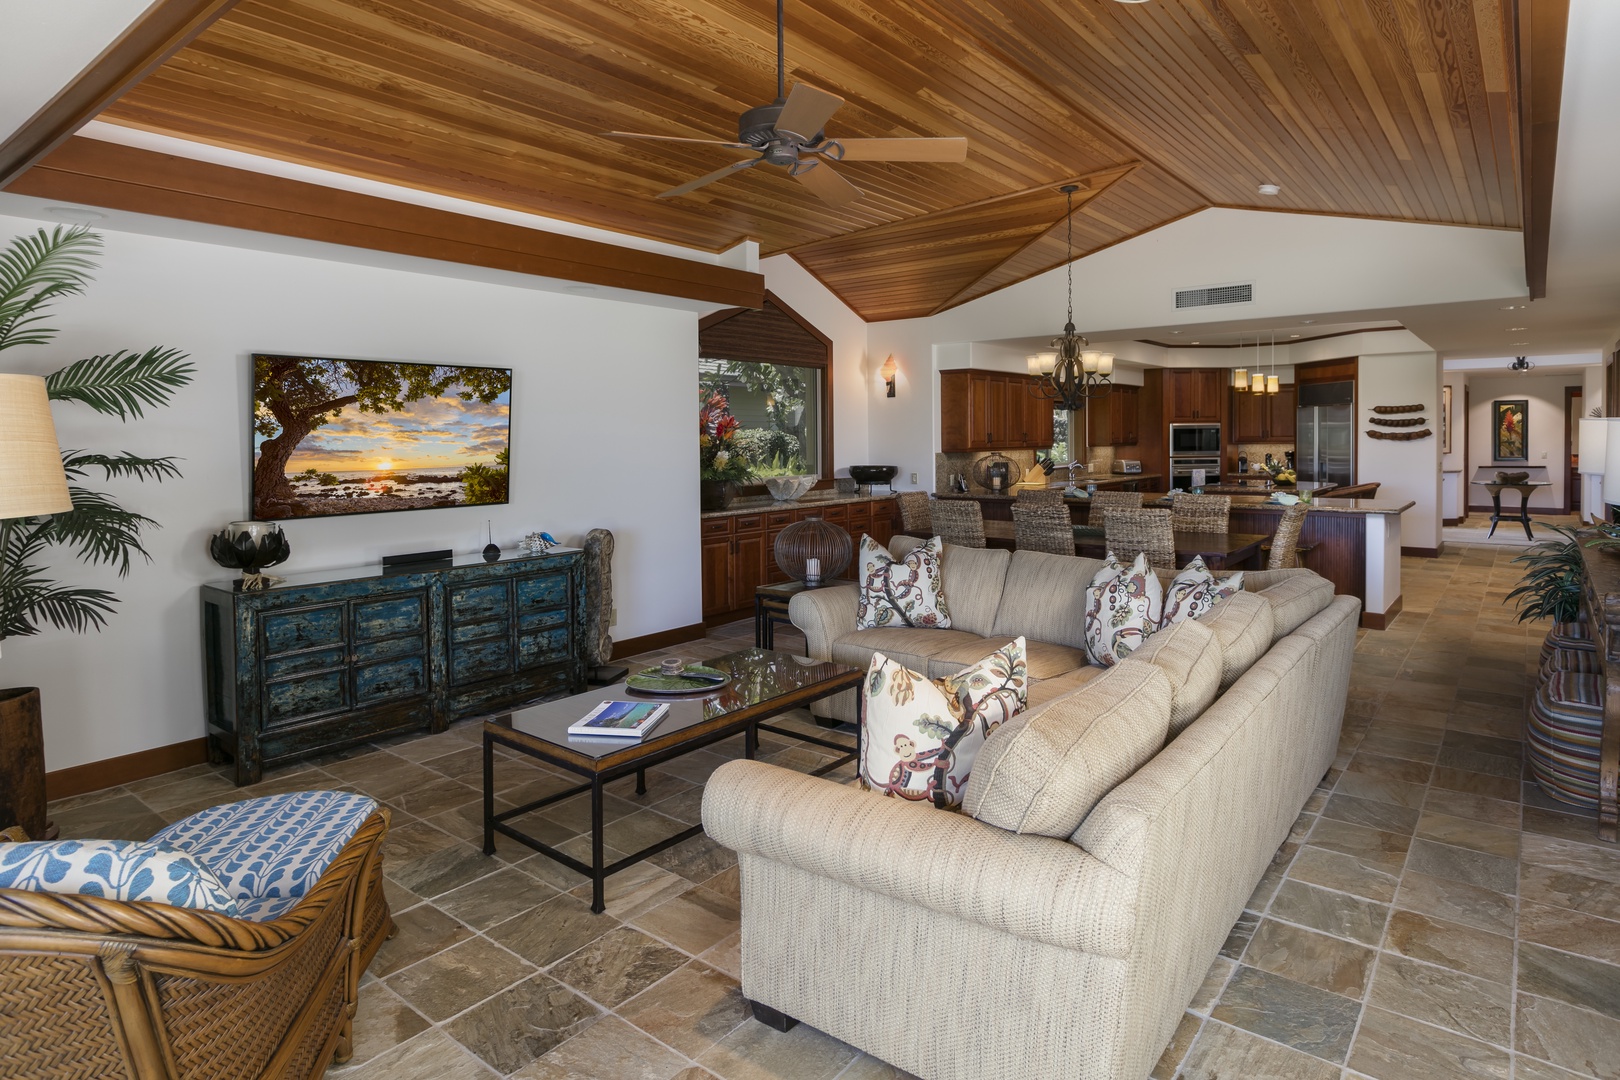 Kamuela Vacation Rentals, Villages at Mauna Lani Resort Unit # 728 - TVs in the great room and all three bedrooms